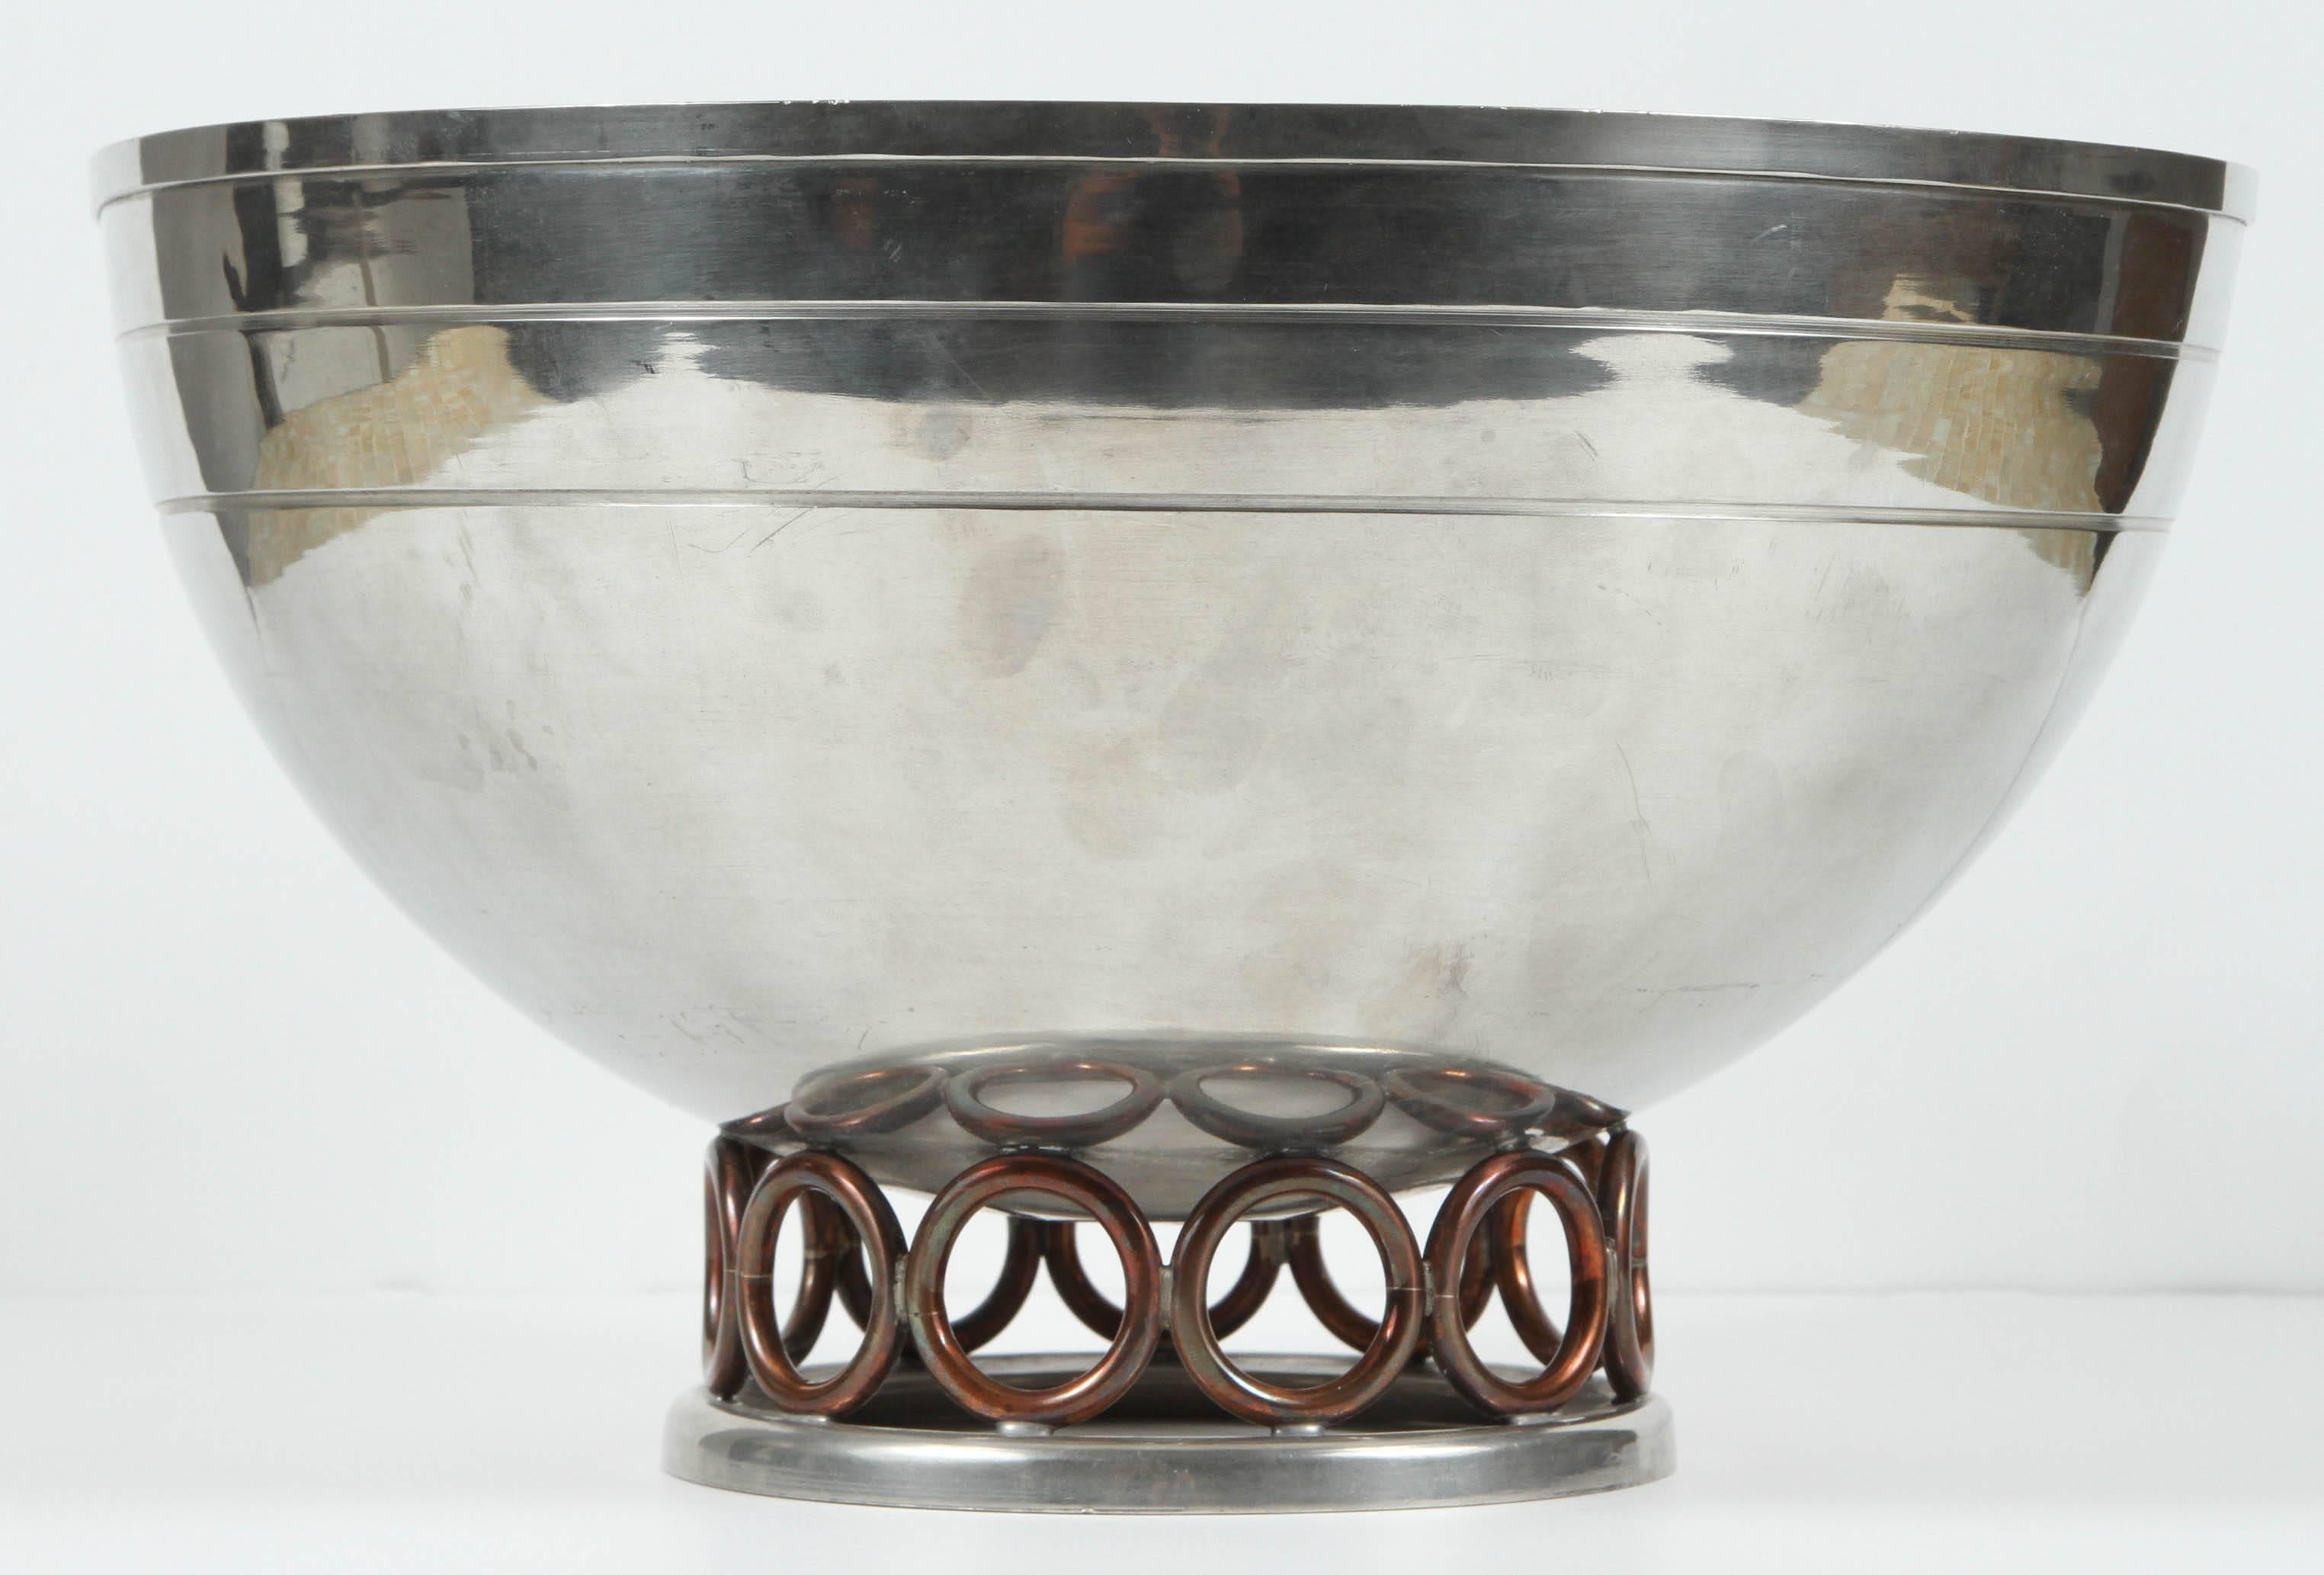 Handmade Colonial pewter bowl by American silversmith Porter Blanchard.

Stamped on bottom. Excellent condition.